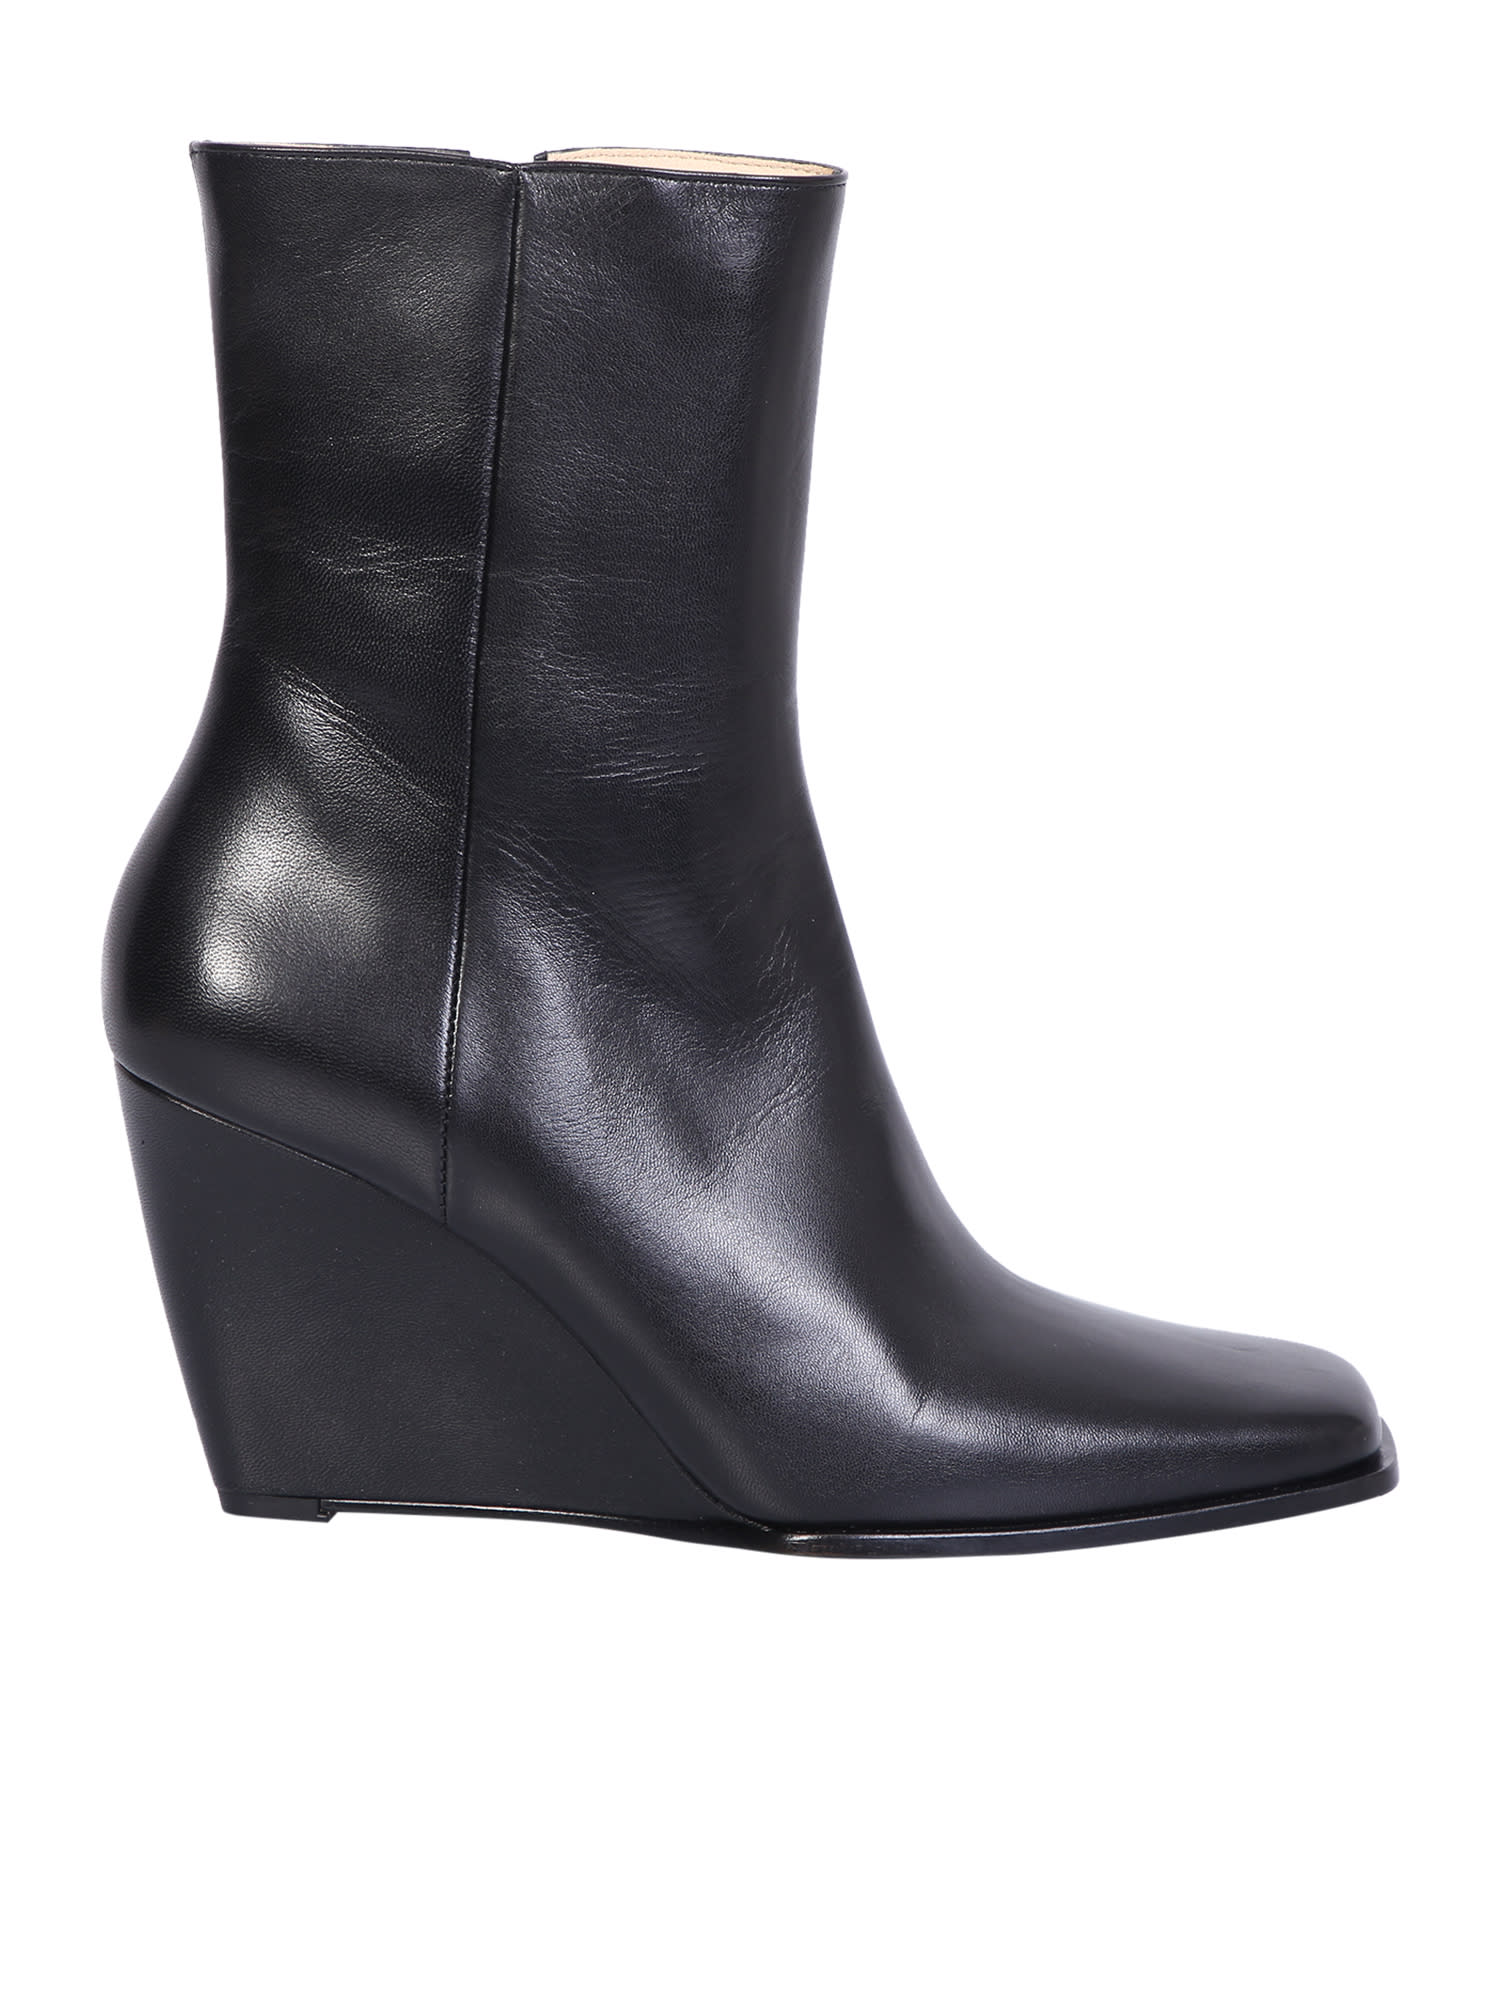 Wandler Gaia Ankle Boots